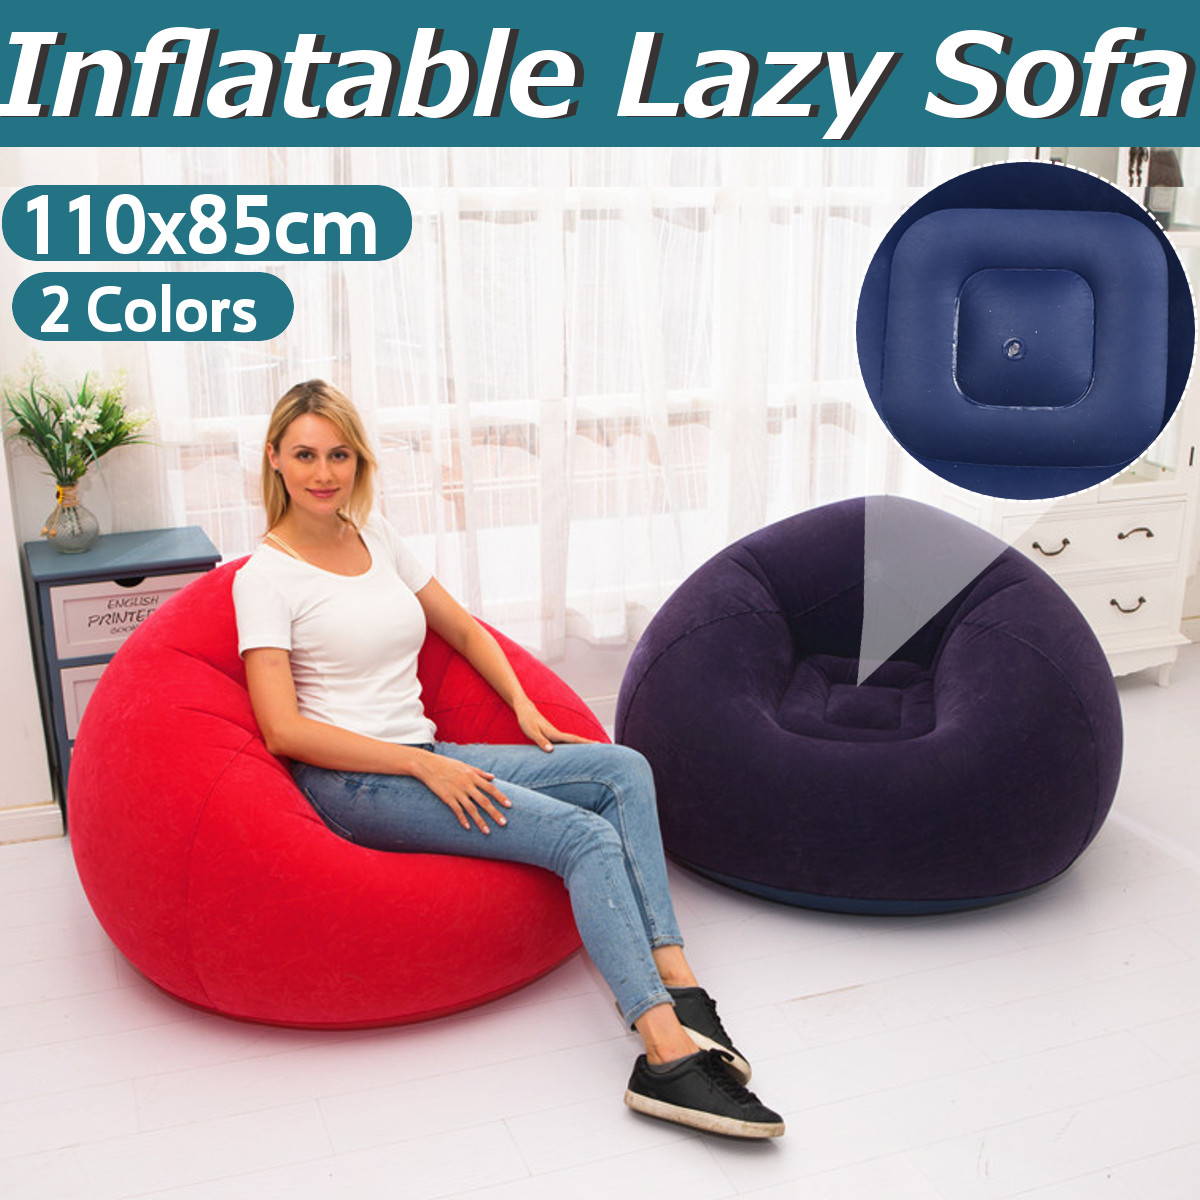 110x85cm-Large-Inflatable-Chair-Bean-Bag-PVC-IndoorOutdoor-Garden-Furniture-Lounge-Adult-Lazy-Sofa-N-1682288-1